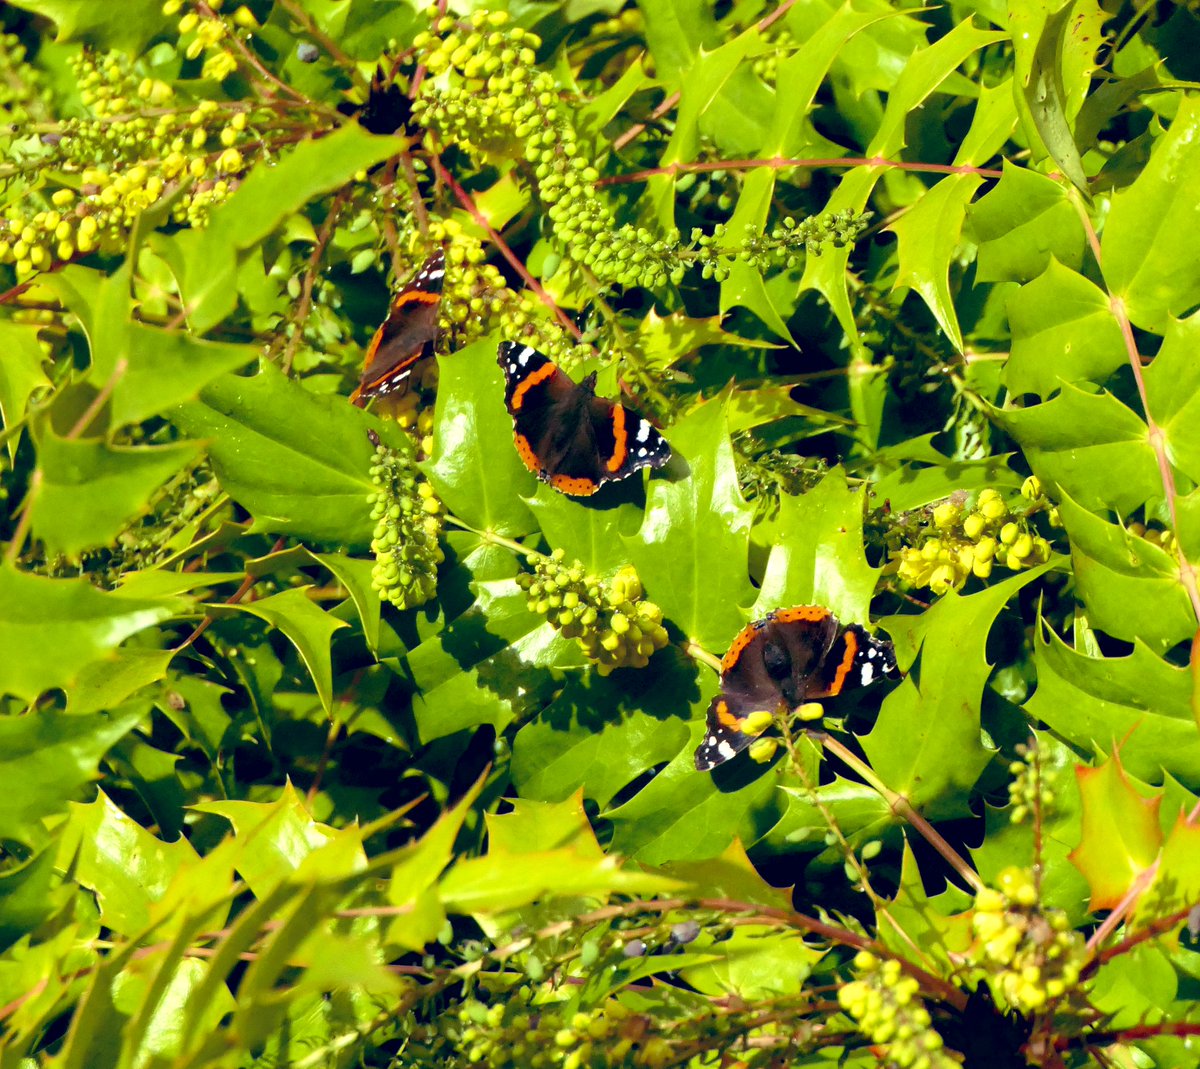 When it come to nectar at this time of year, Mahonia seems to be the big attraction. A three Red Admiral day today. #butterflies